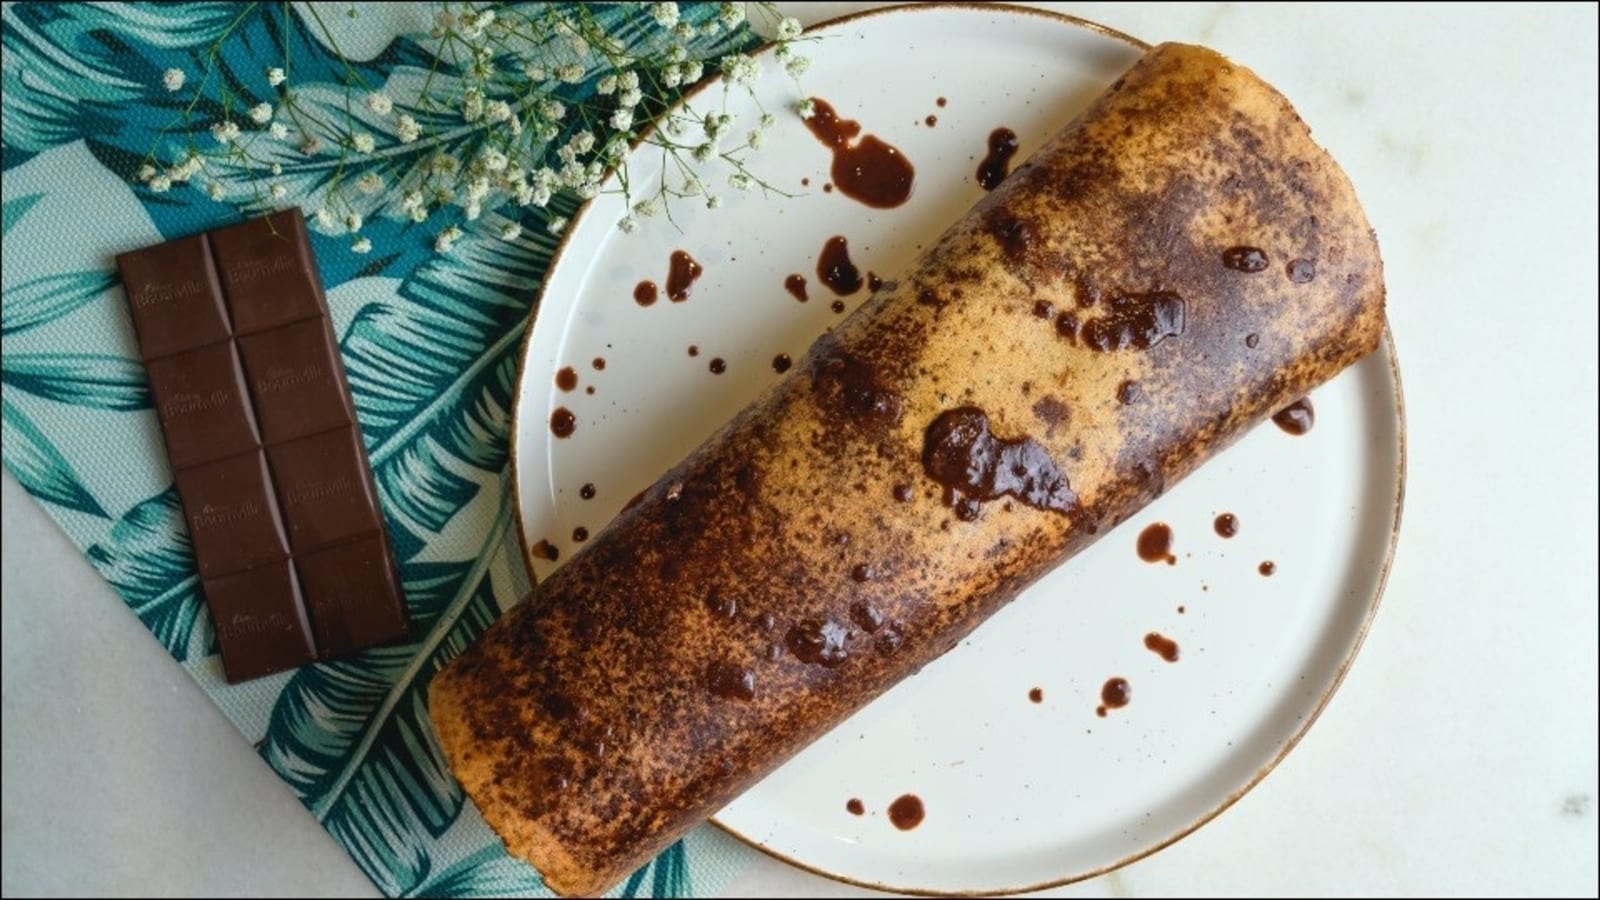 Recipe: We dare you to move over regular dosas and try this chocolate dosa